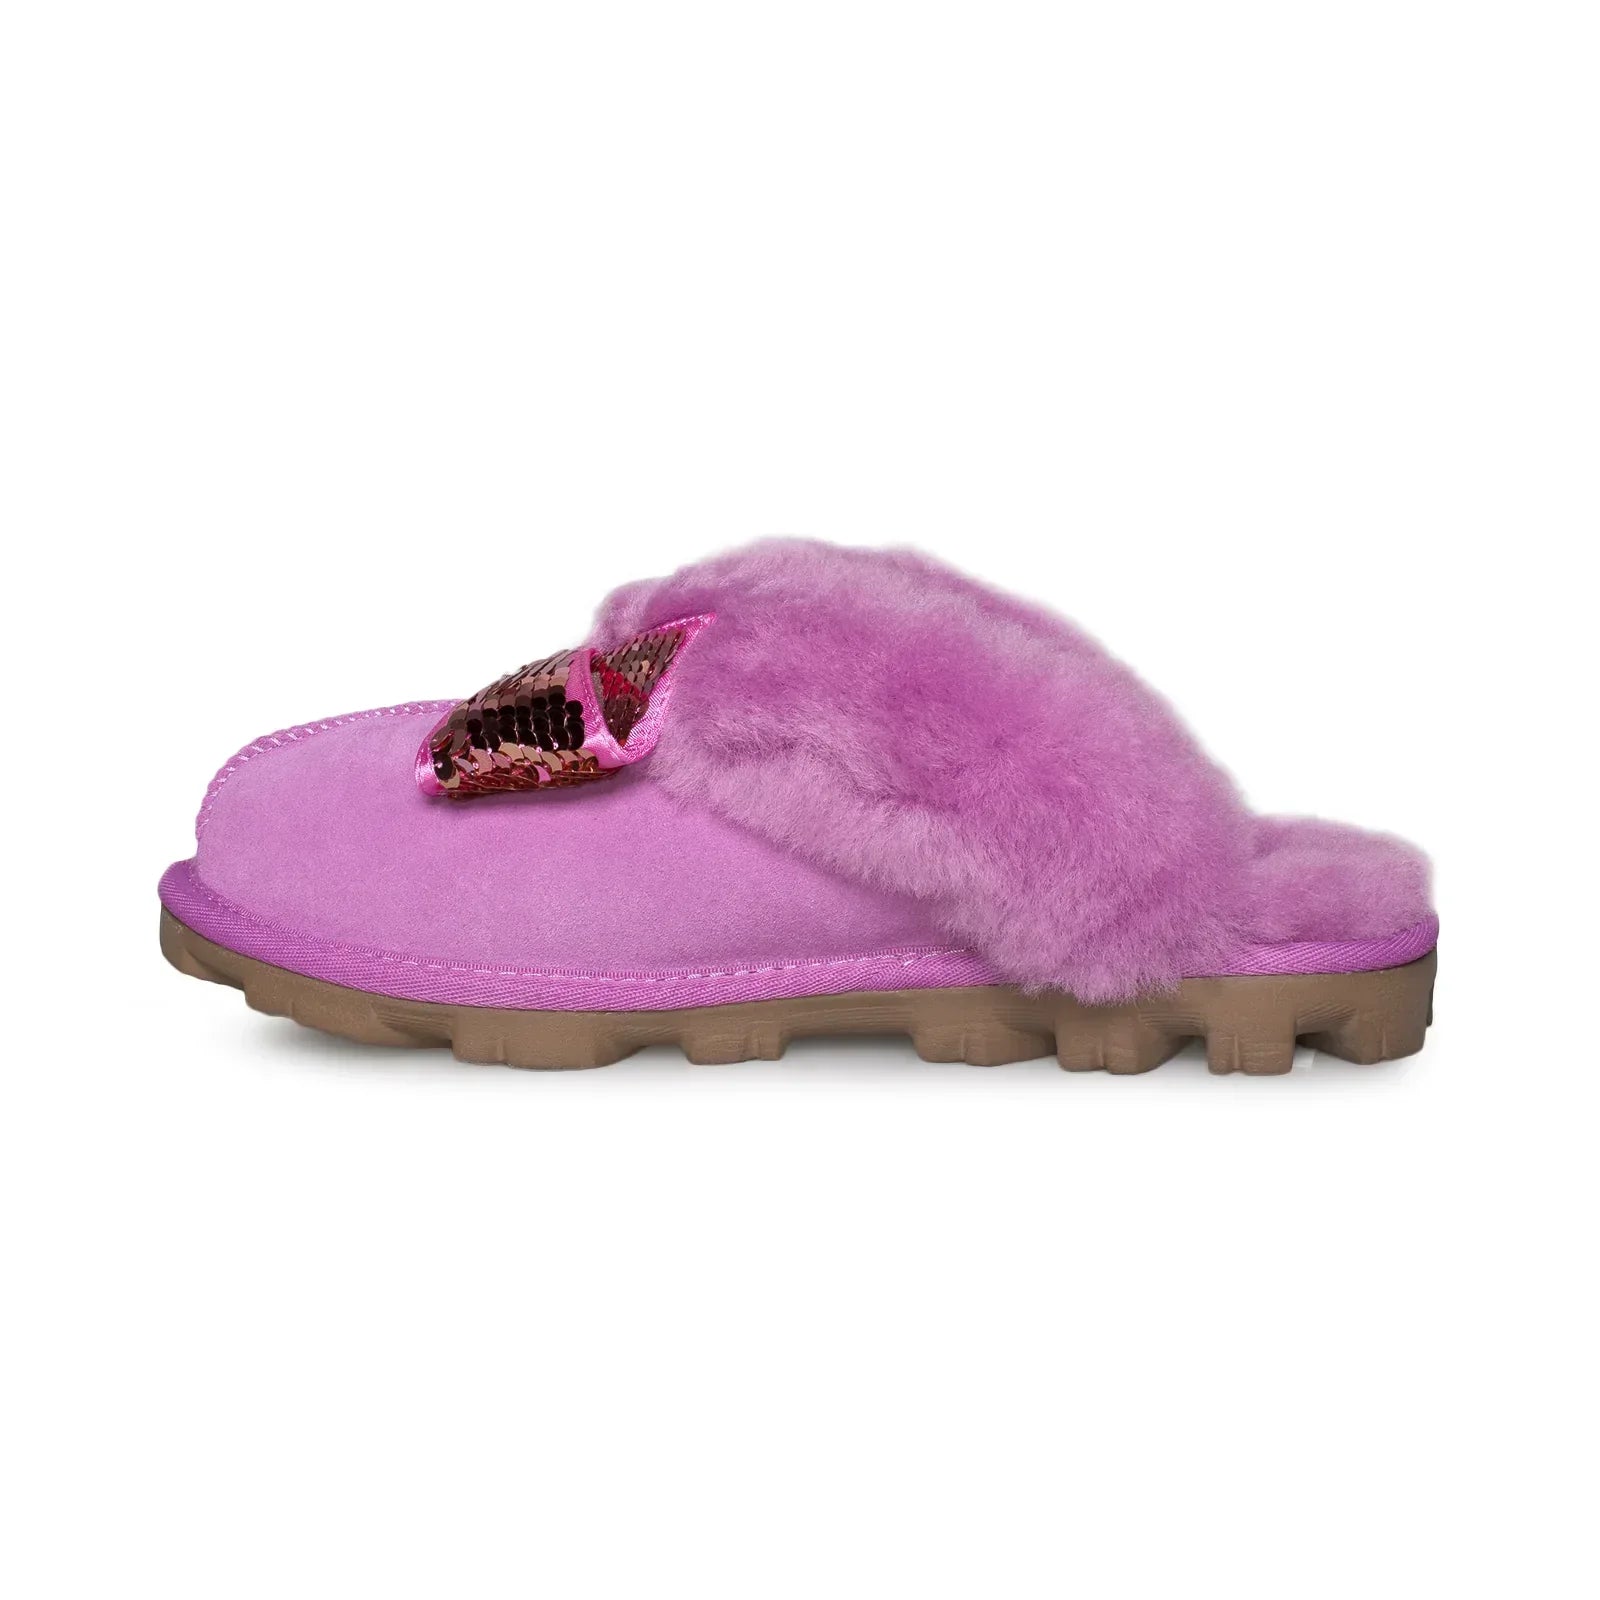 UGG Coquette Sequin Bow Bodacious Slippers - Women's